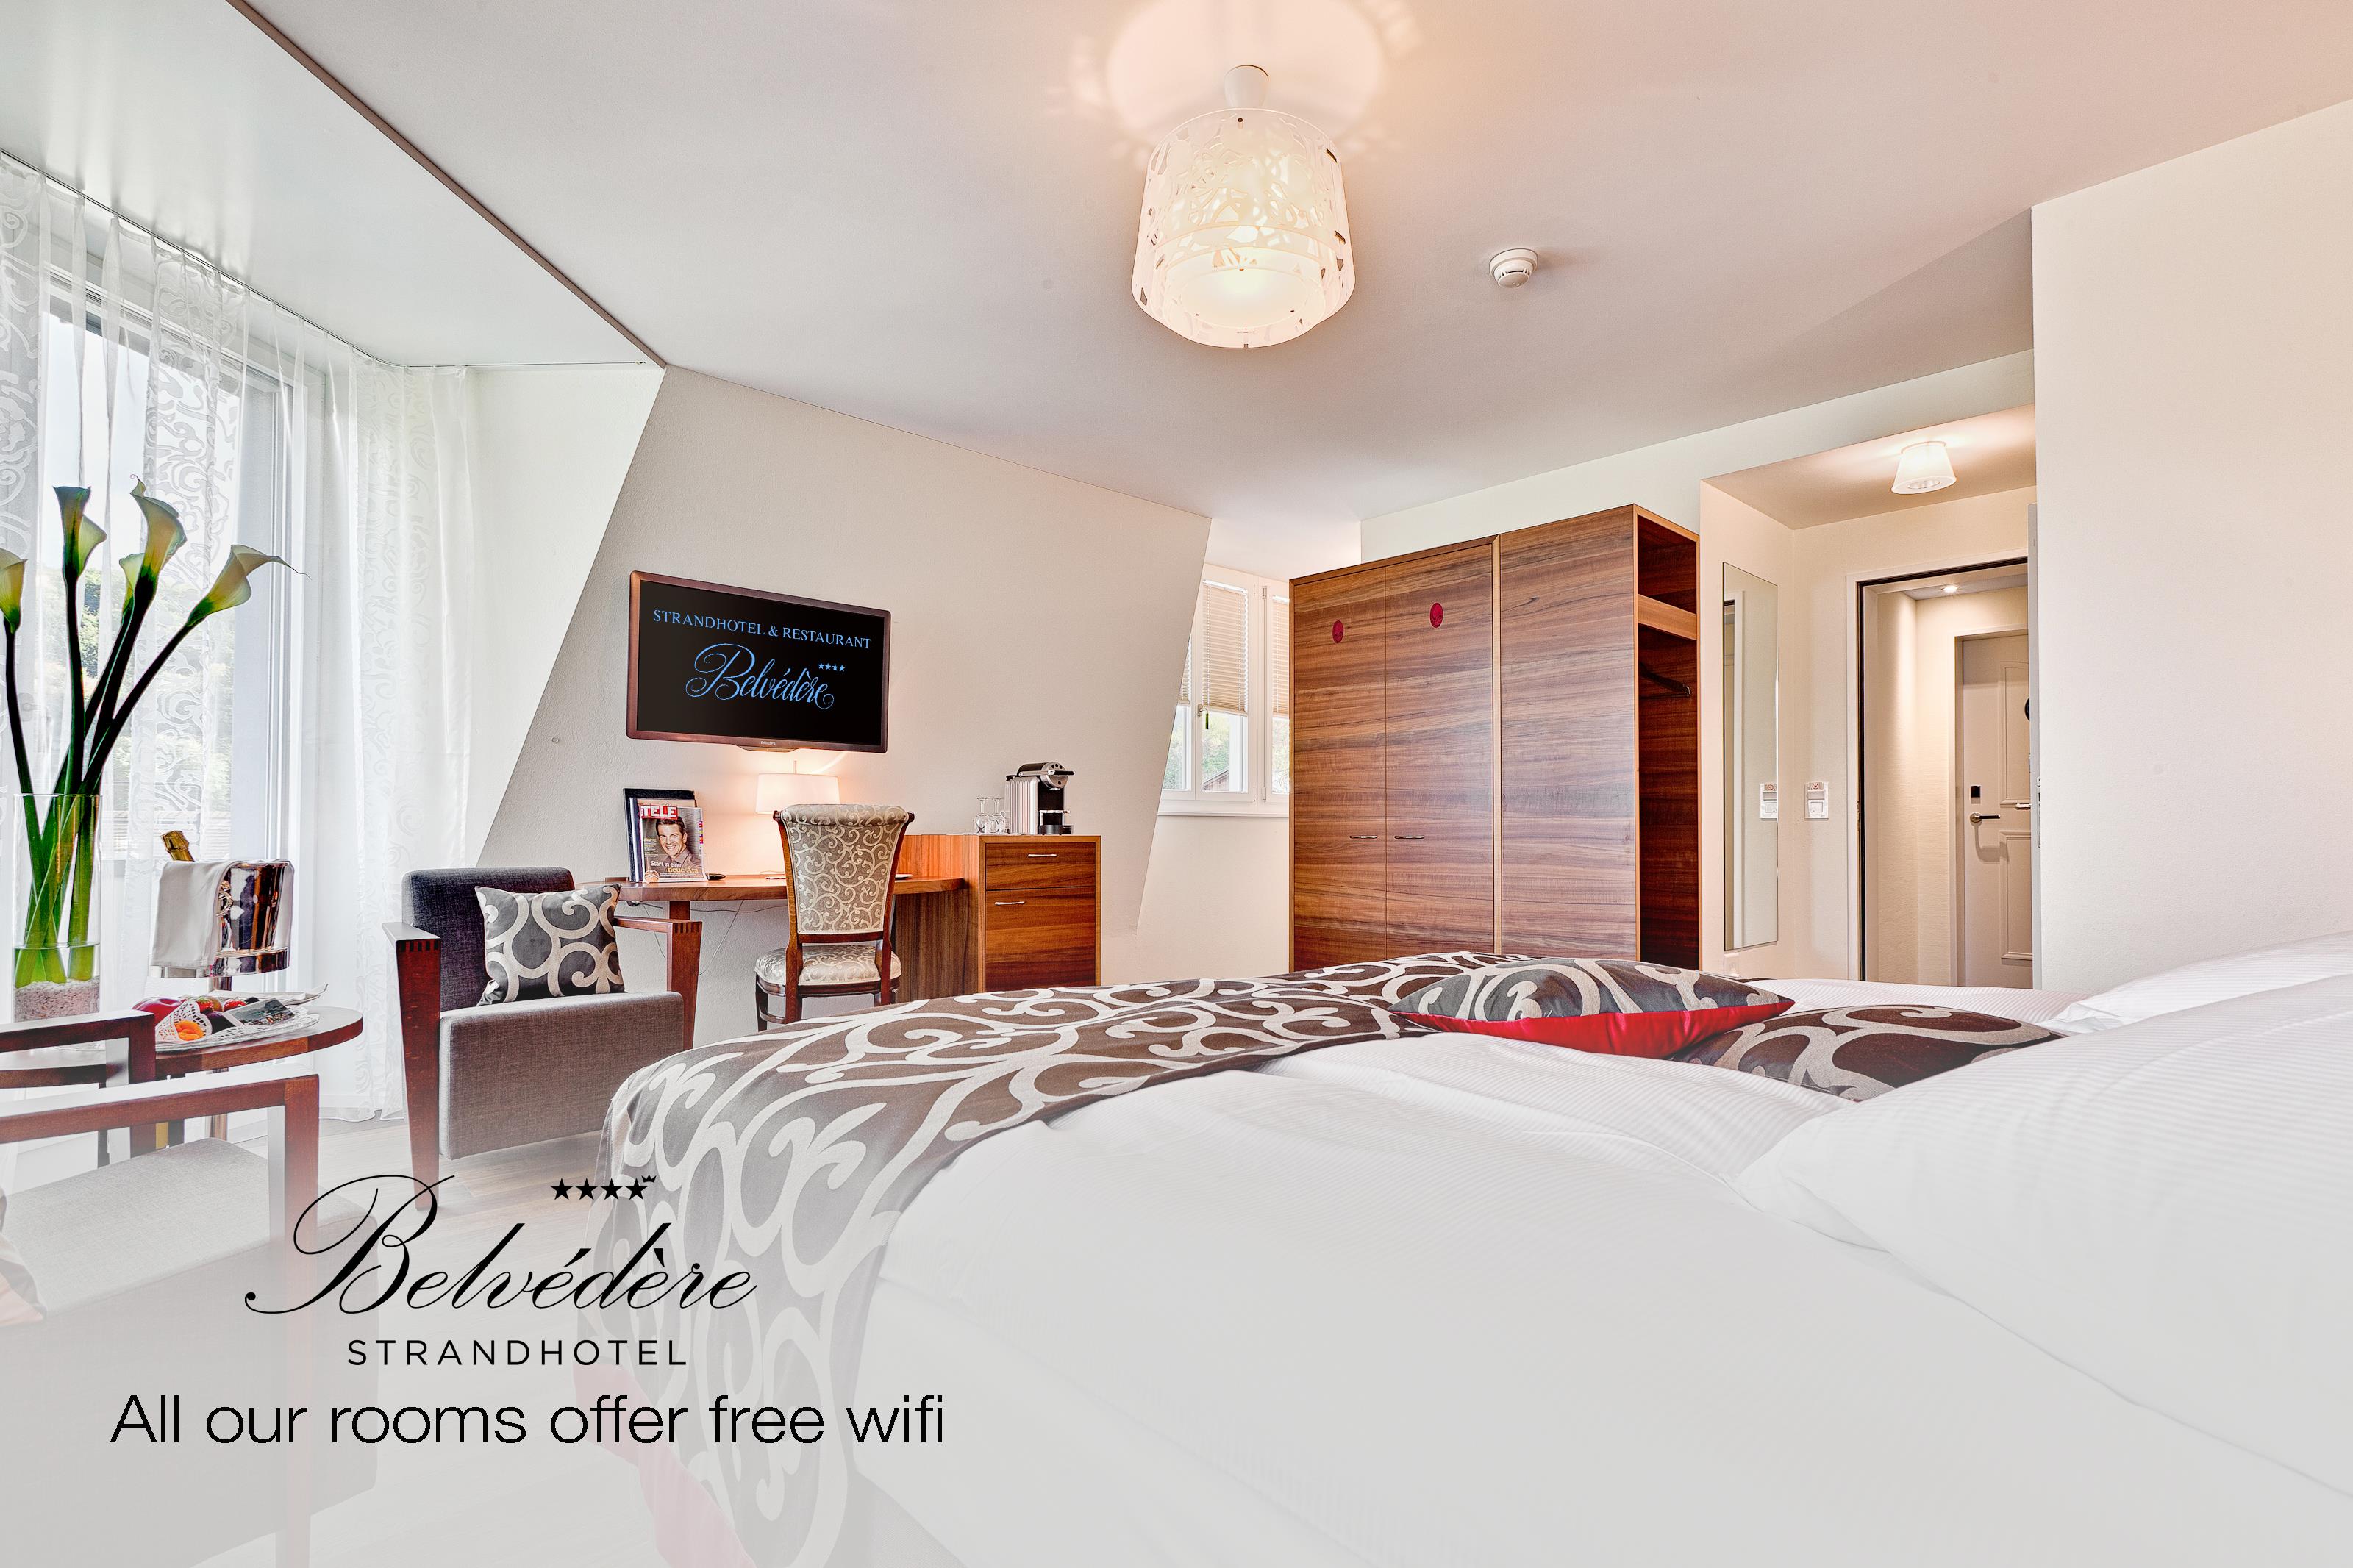 All our rooms offer free wifi